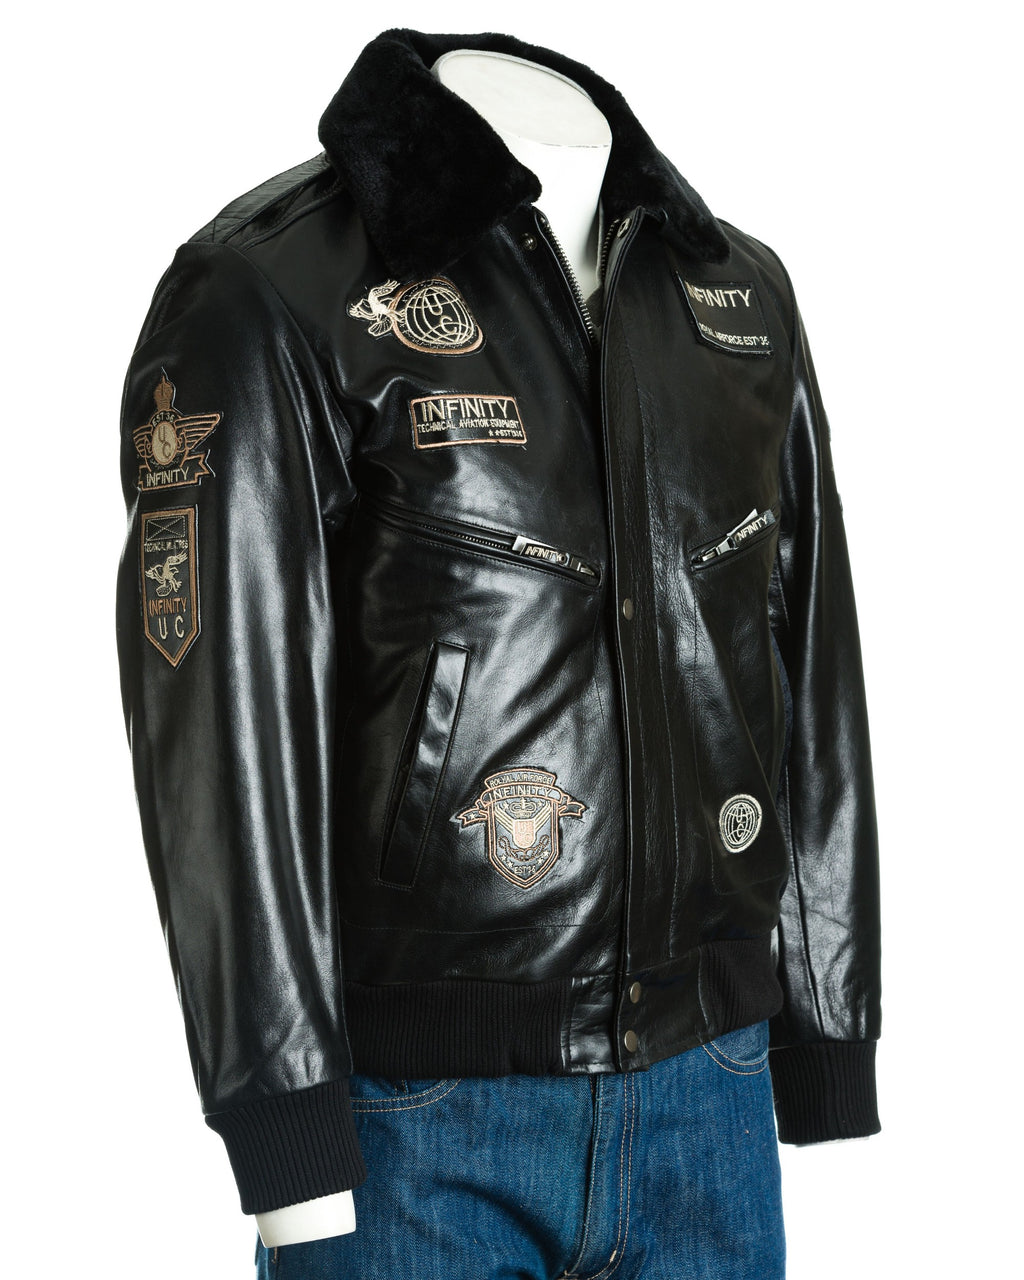 Men's Black Aviator Pilot Flight A2 Style Leather Jacket With Patch Detail And Detachable Faux Fur Collar: Giuseppe